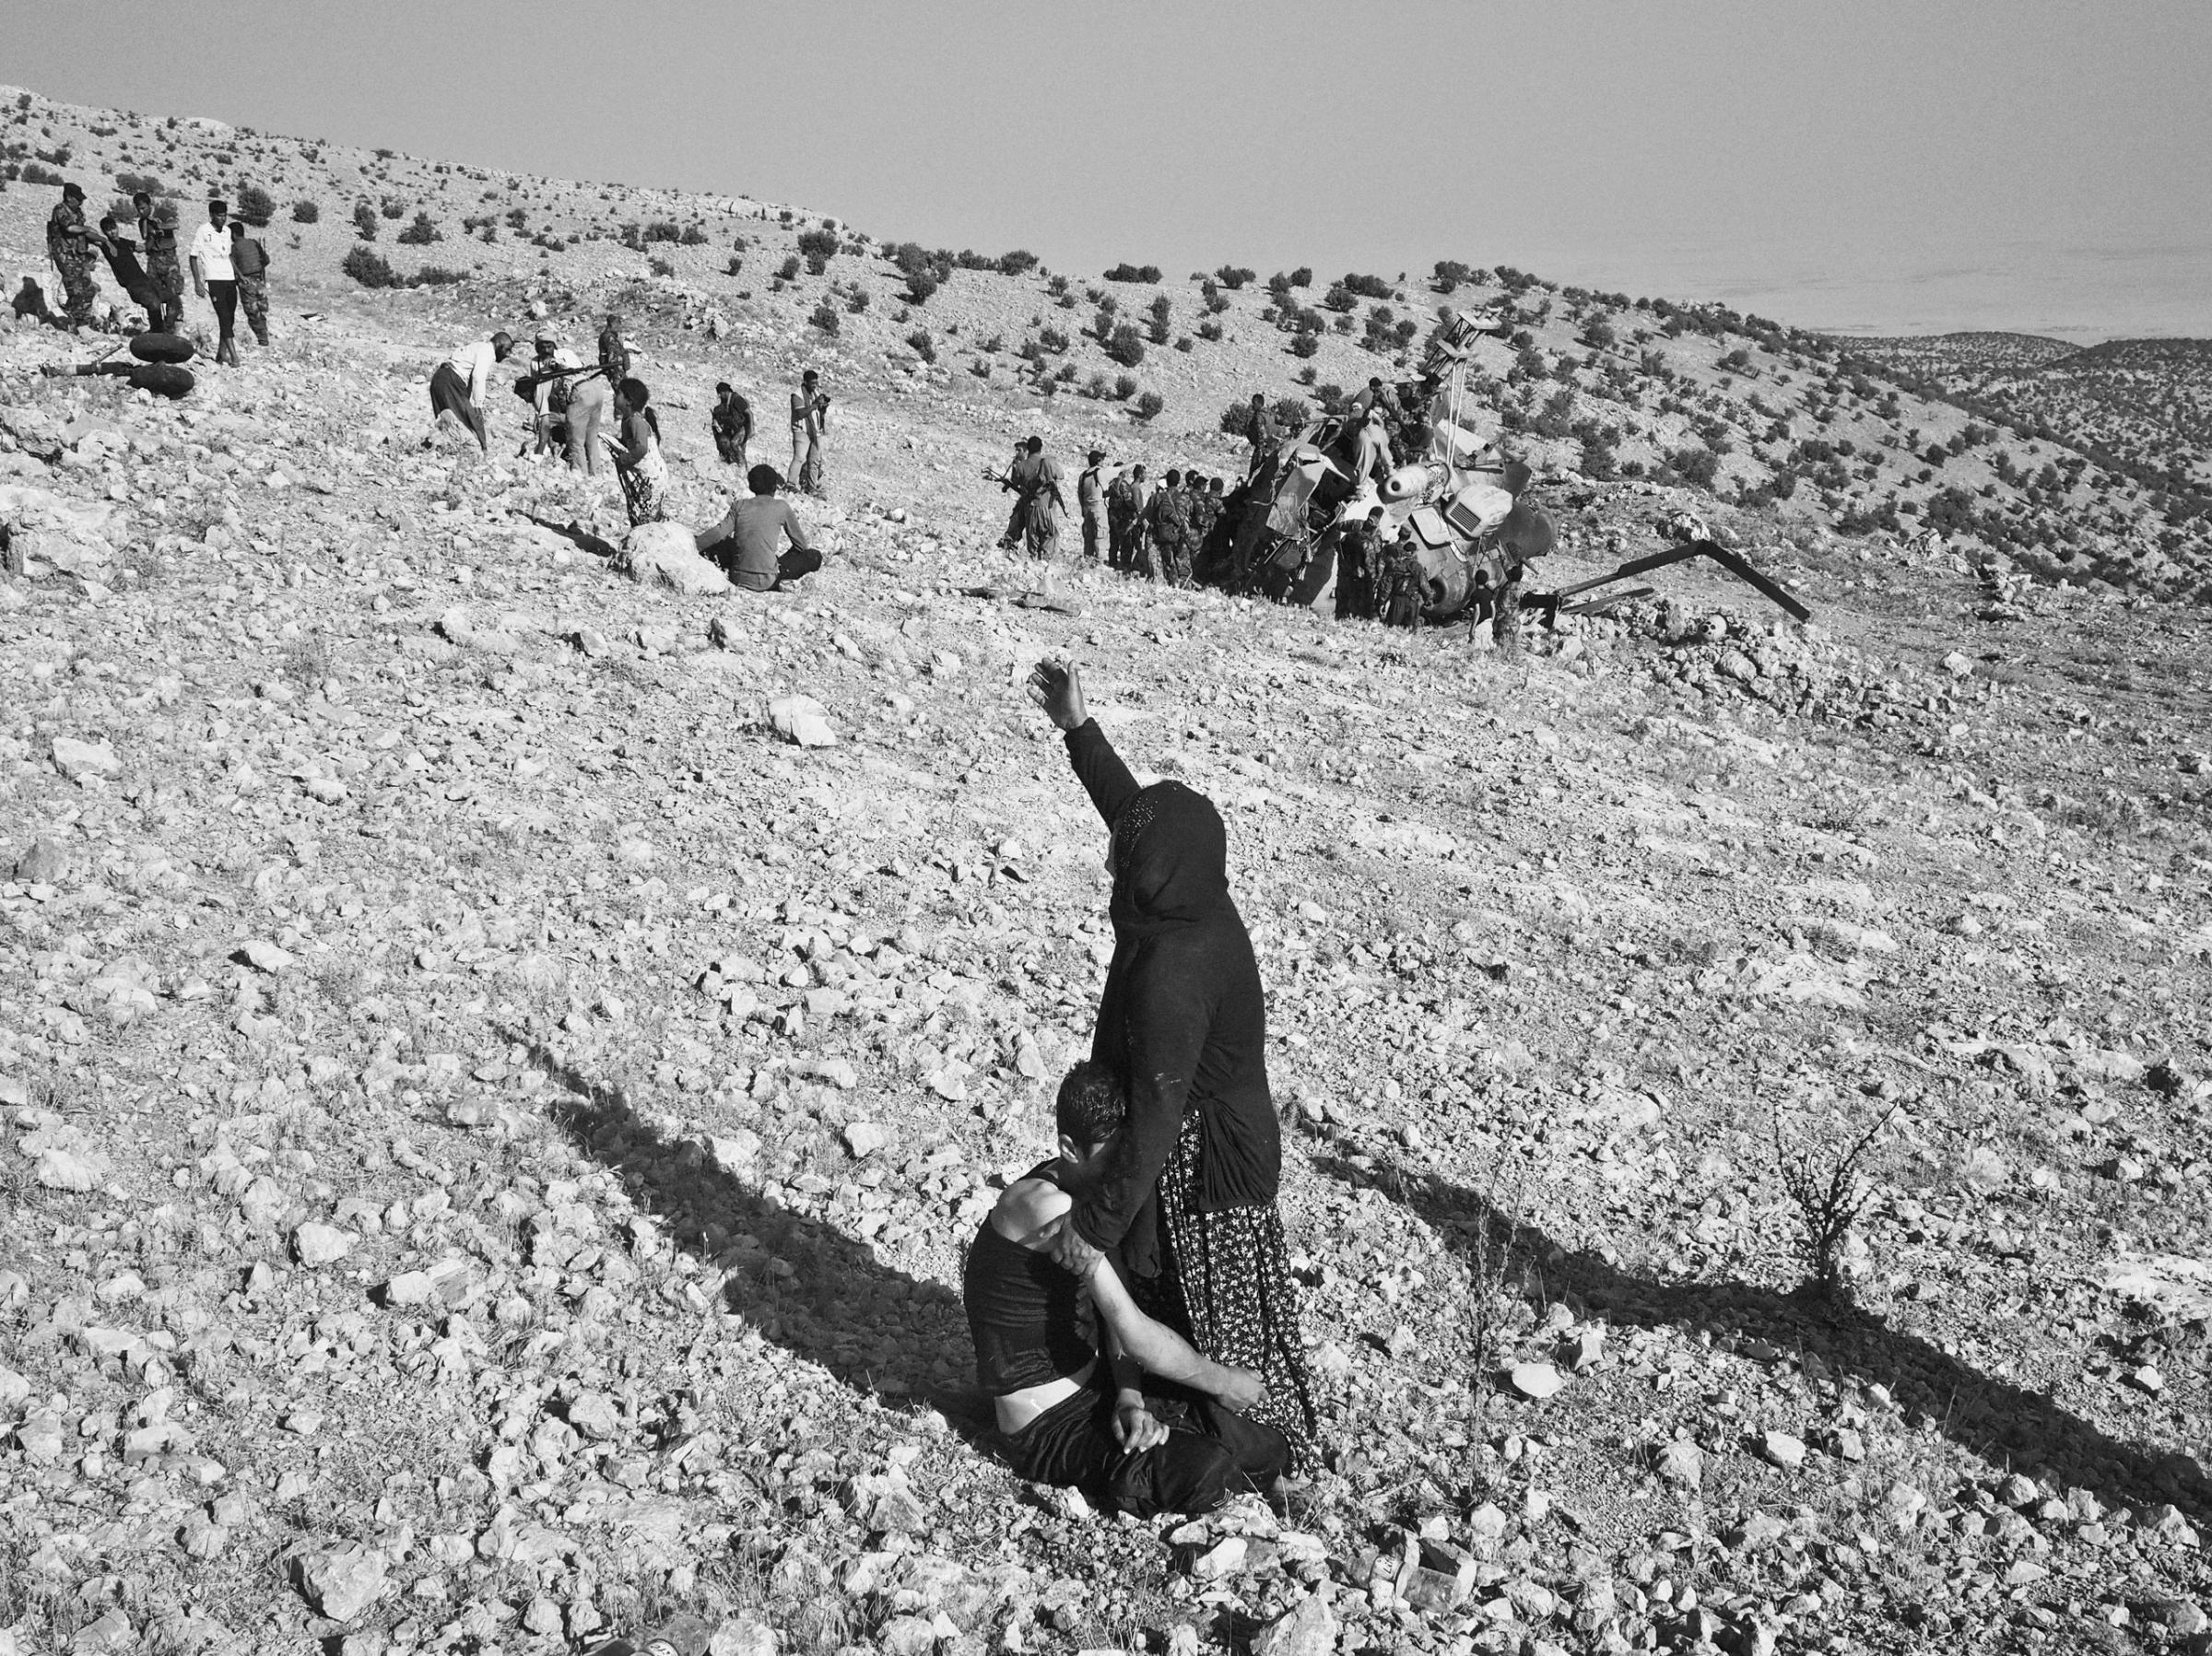 A woman cries for help as she holds on to her wounded son at the crash site of an Iraqi air force helicopter. Sinjar Mountains, Iraq. Aug. 12, 2014.